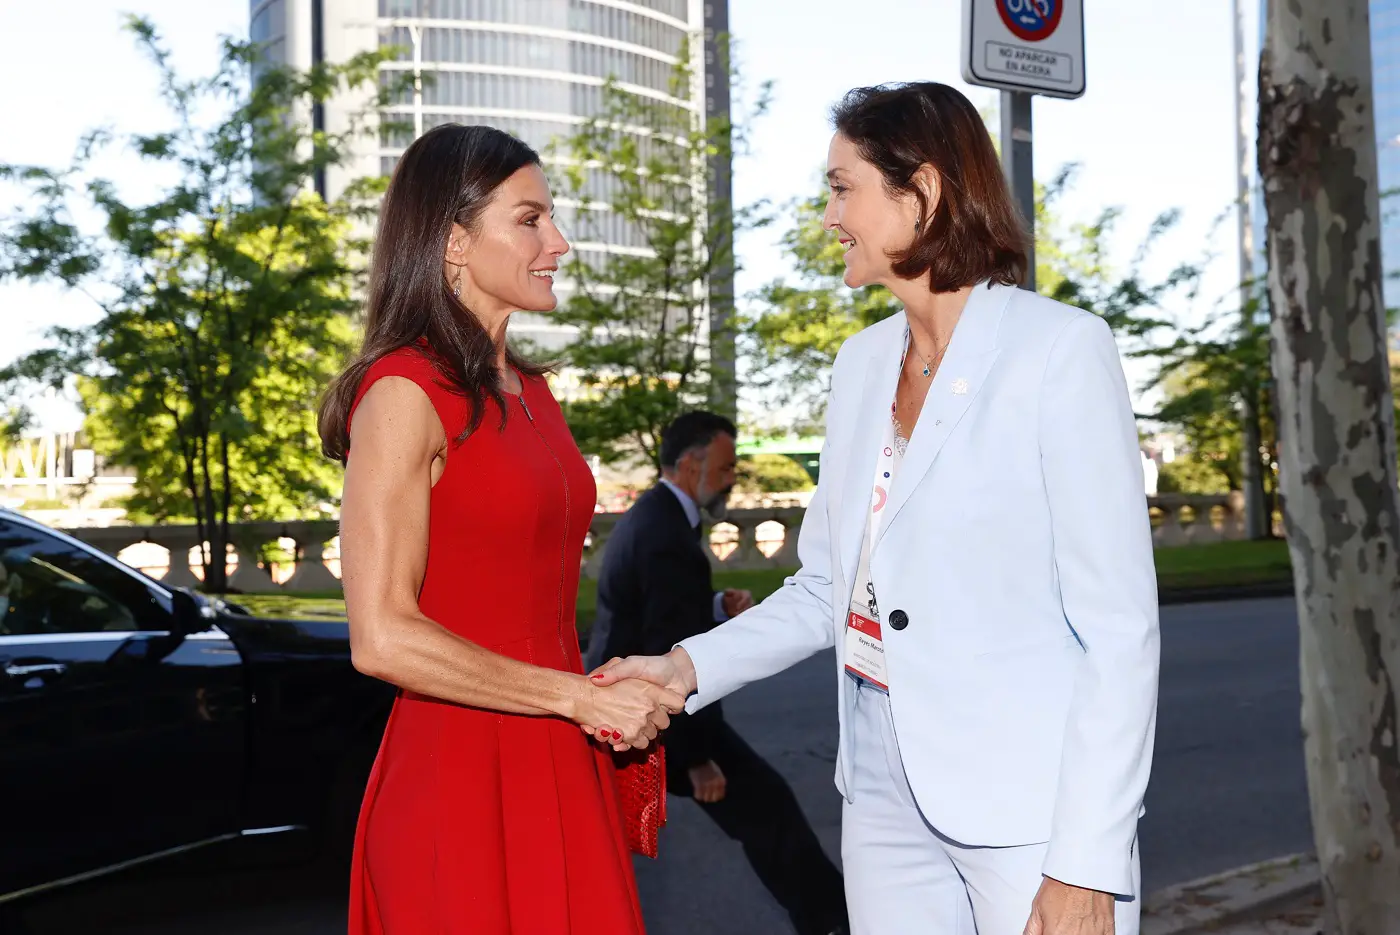 Queen Letizia of Spain chose Red Herrera for Filming Roundtable